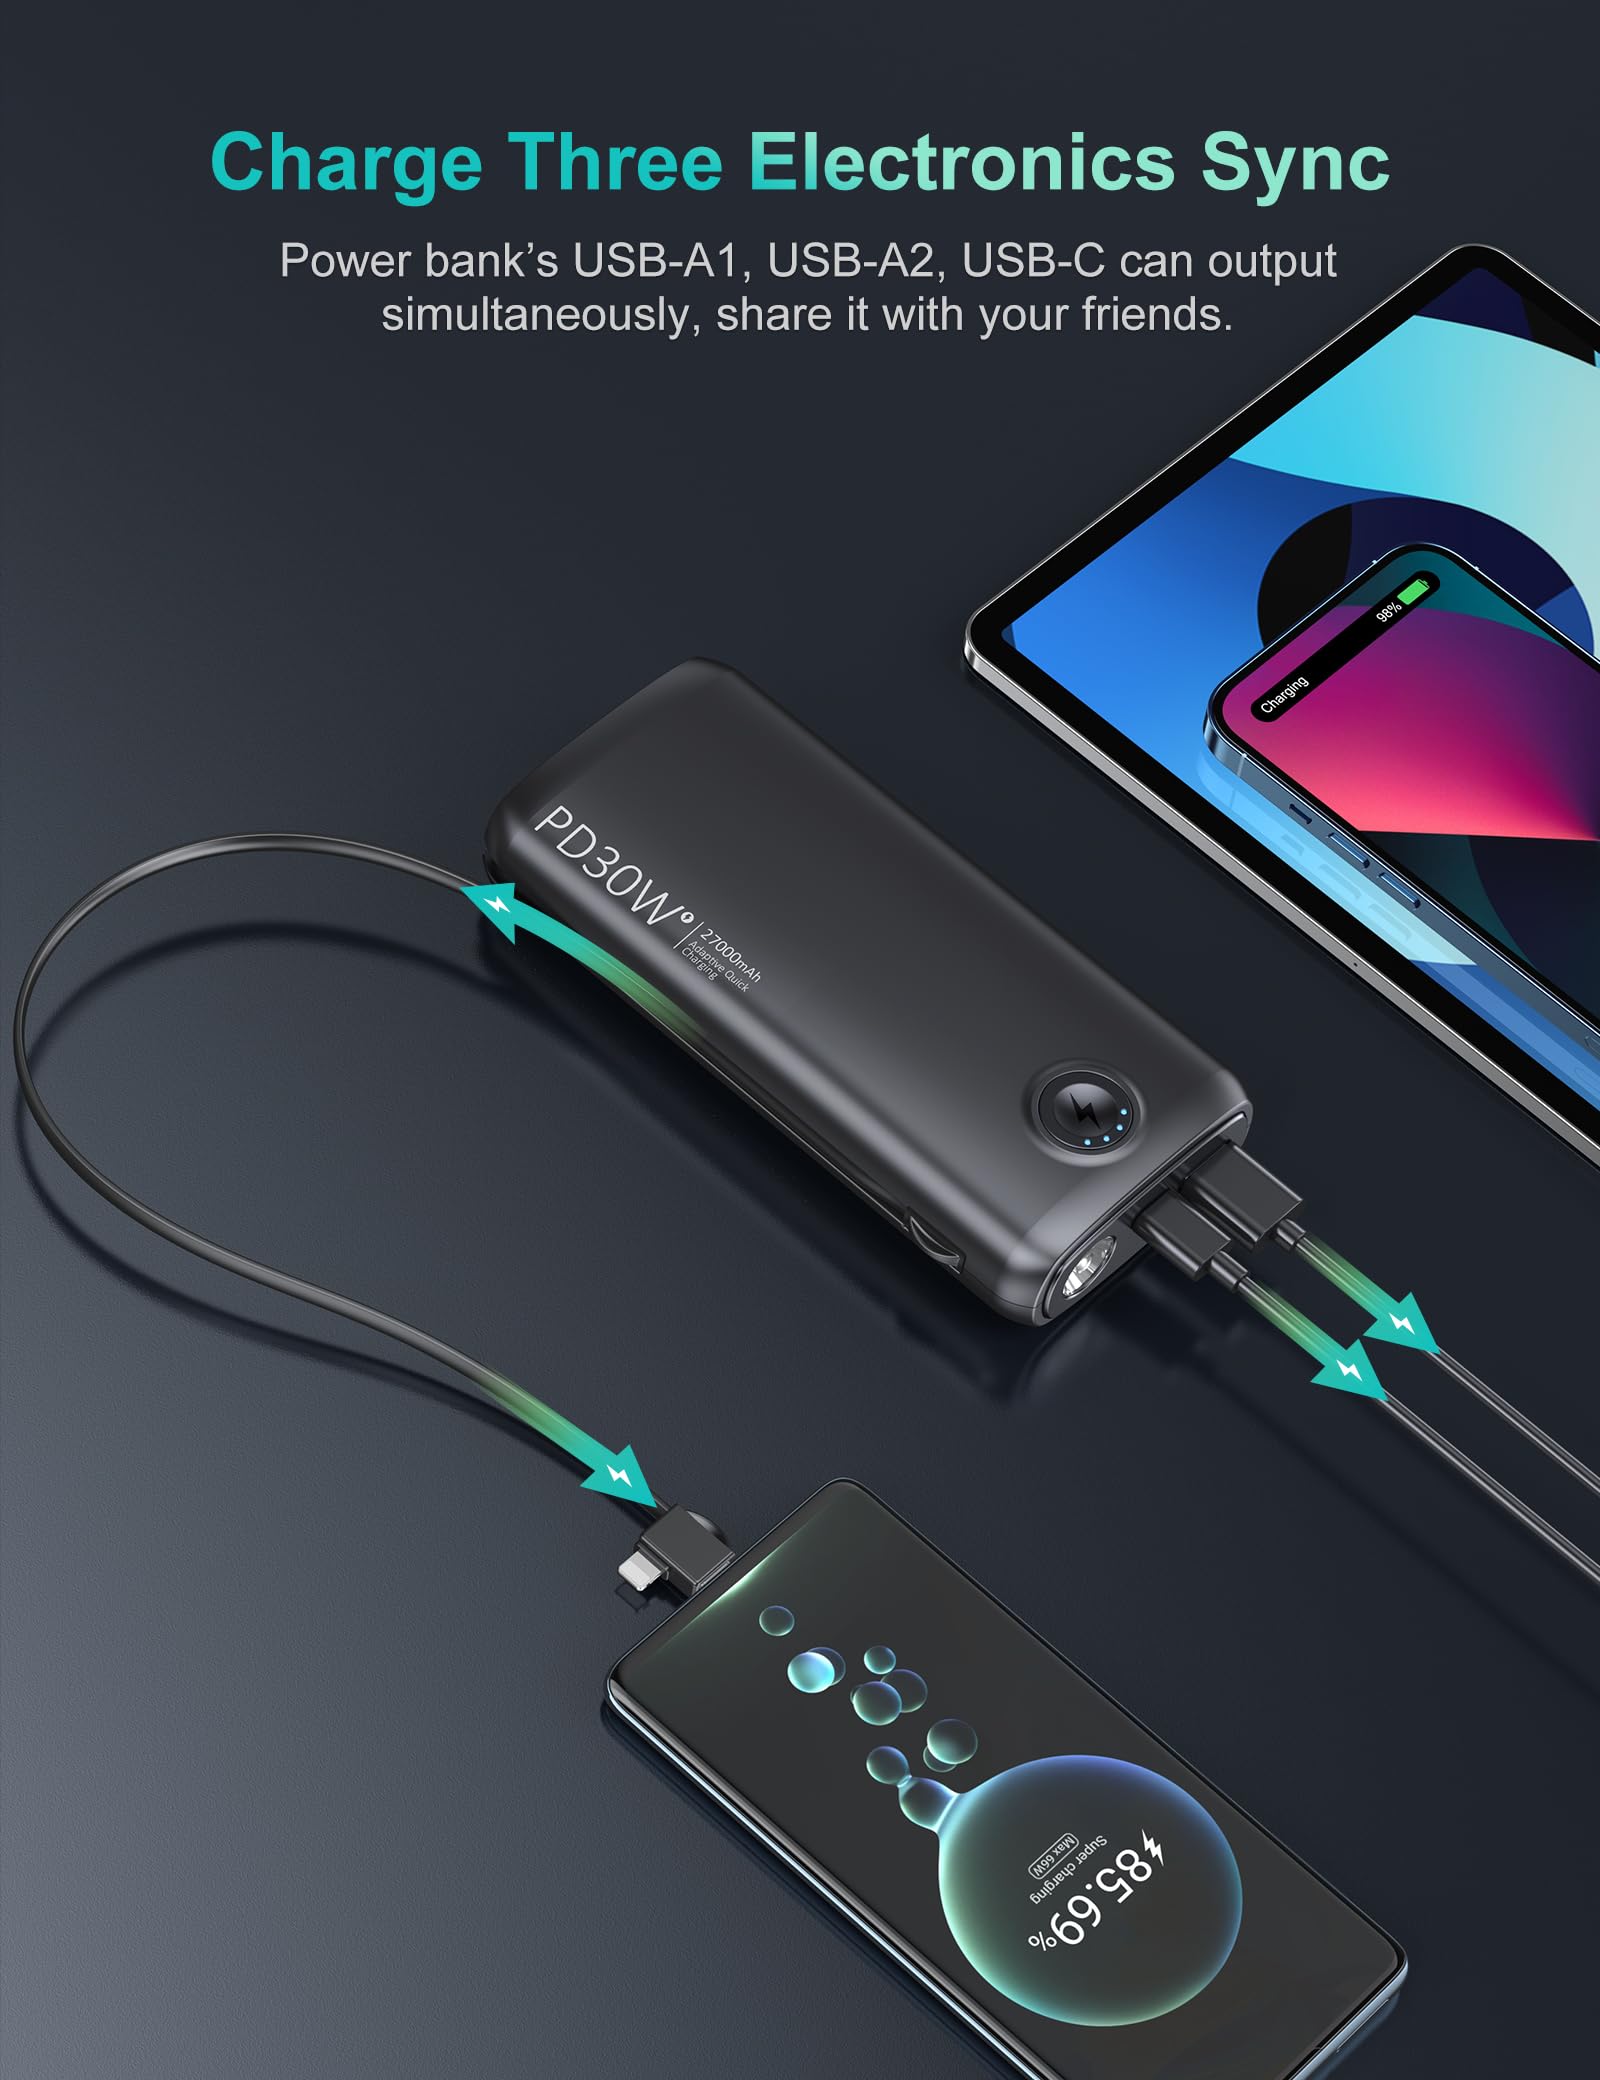 Dpdenoy Portable Charger with Built in Cable, 27000mAh Power Bank QC4.0 22.5W PD3.0 USB C Fast Charging, Phone Battery Pack with 3W Flashlight for iPhone, Samsung, Google, Tablet, and More